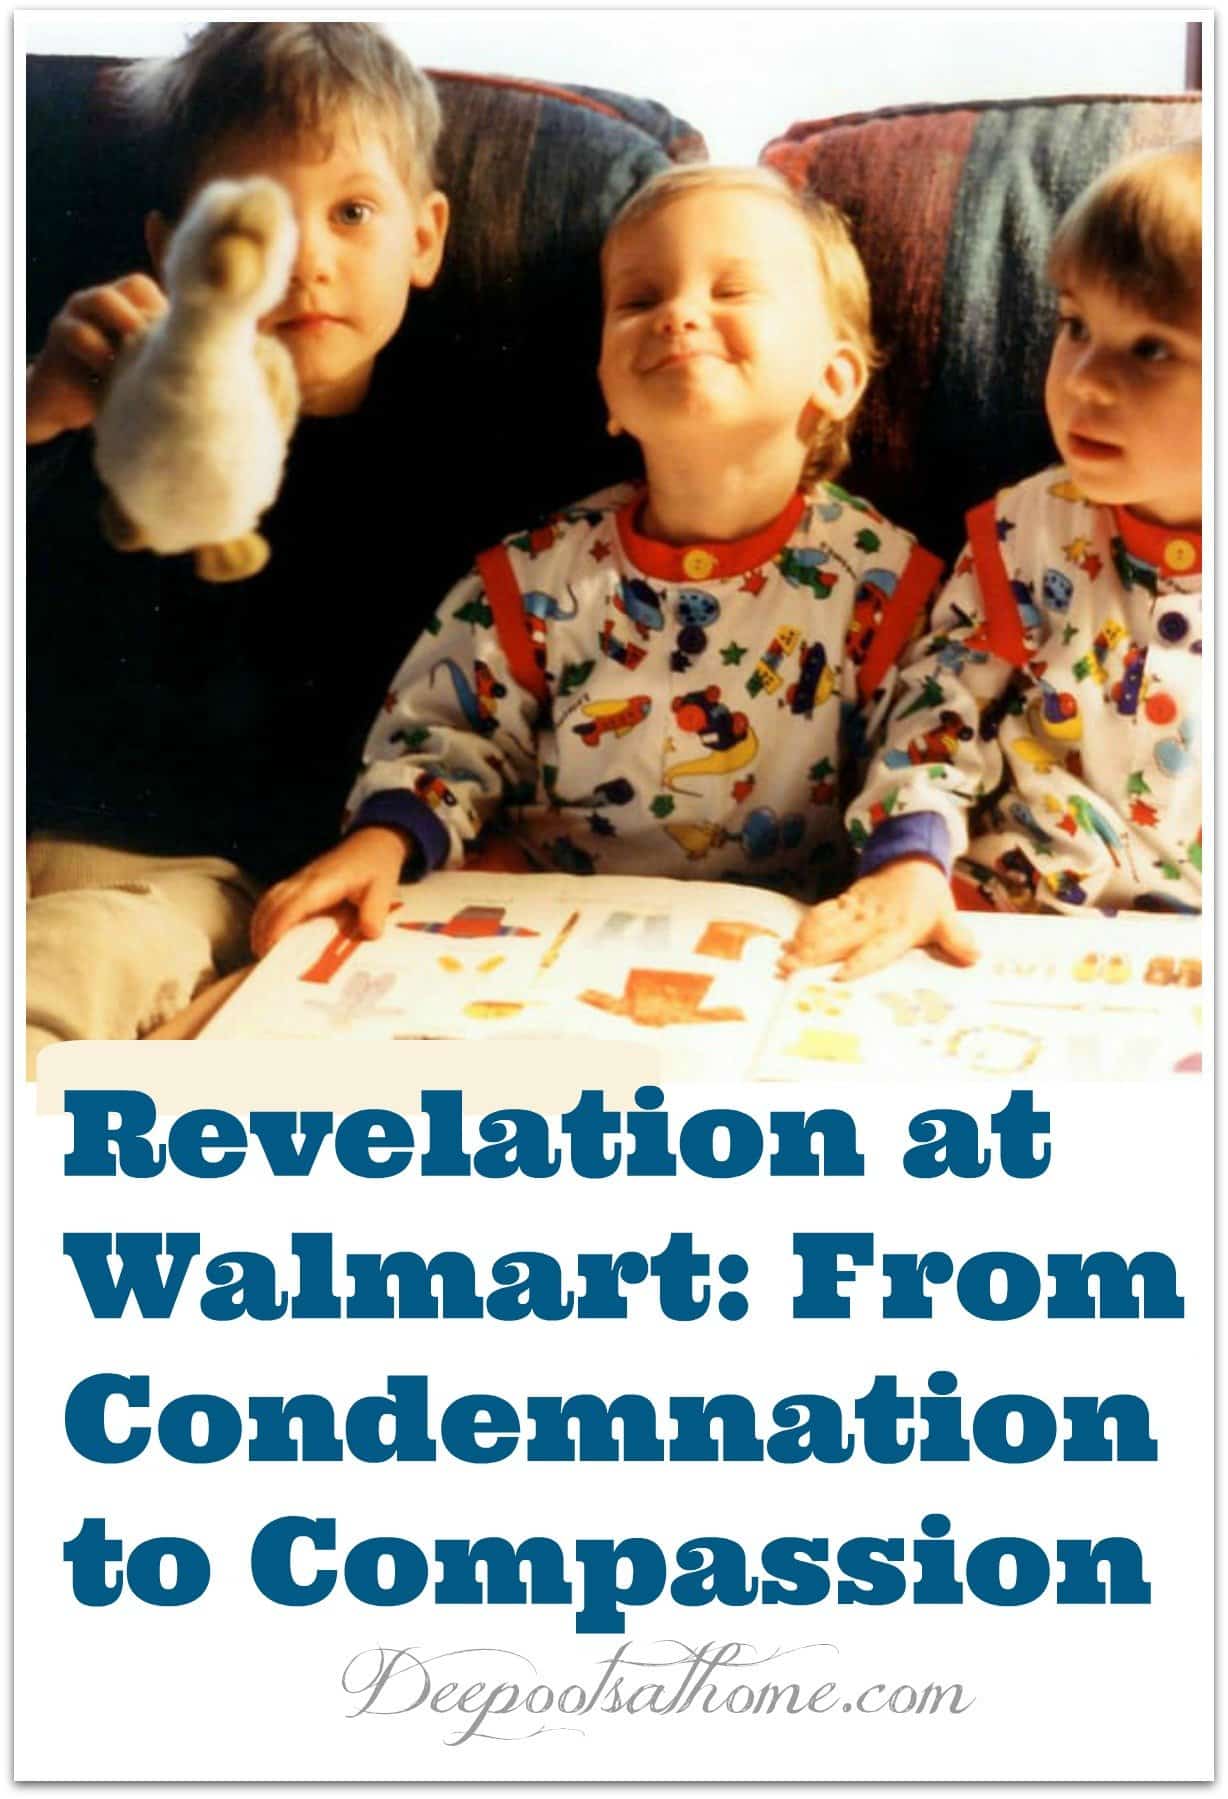 Revelation at Walmart: From Condemnation to Compassion. 3 children